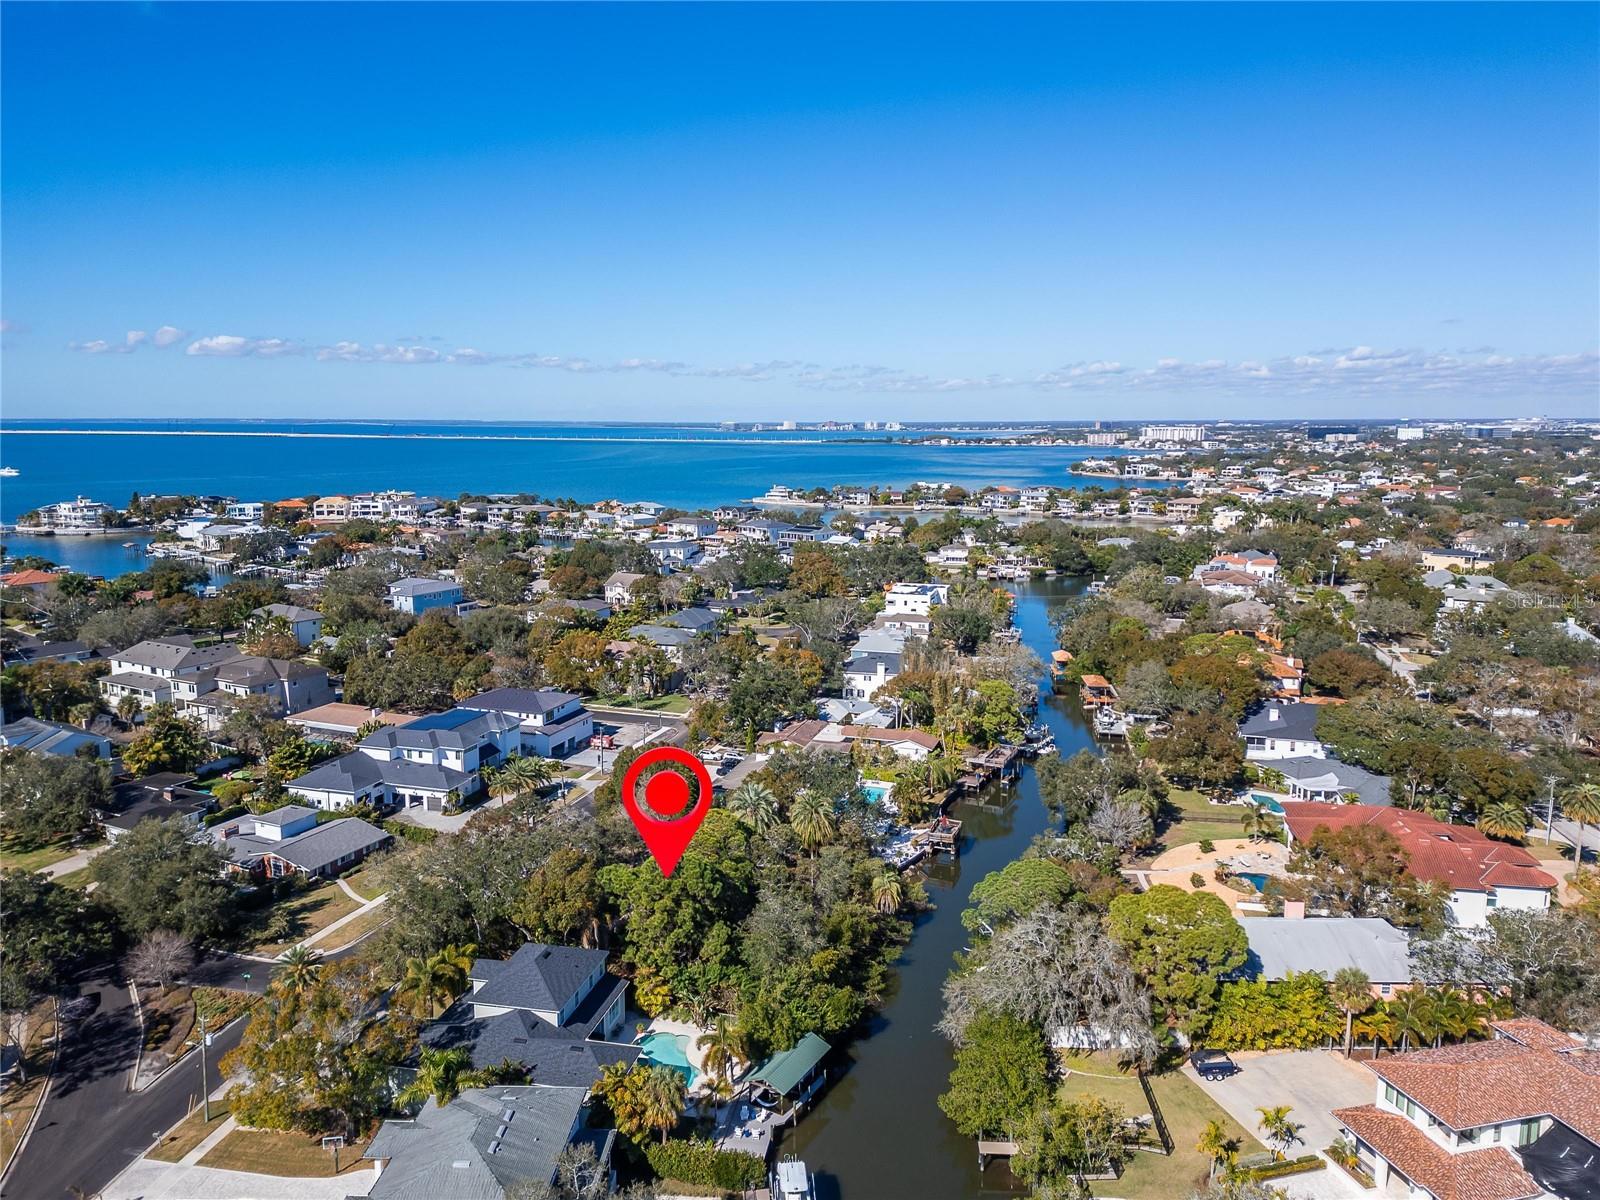 This property has direct access to the Gulf of Mexico via a short canal trip. Watch the drone video to see how quickly you can navigate to open waters. Camera faces NW in this image.